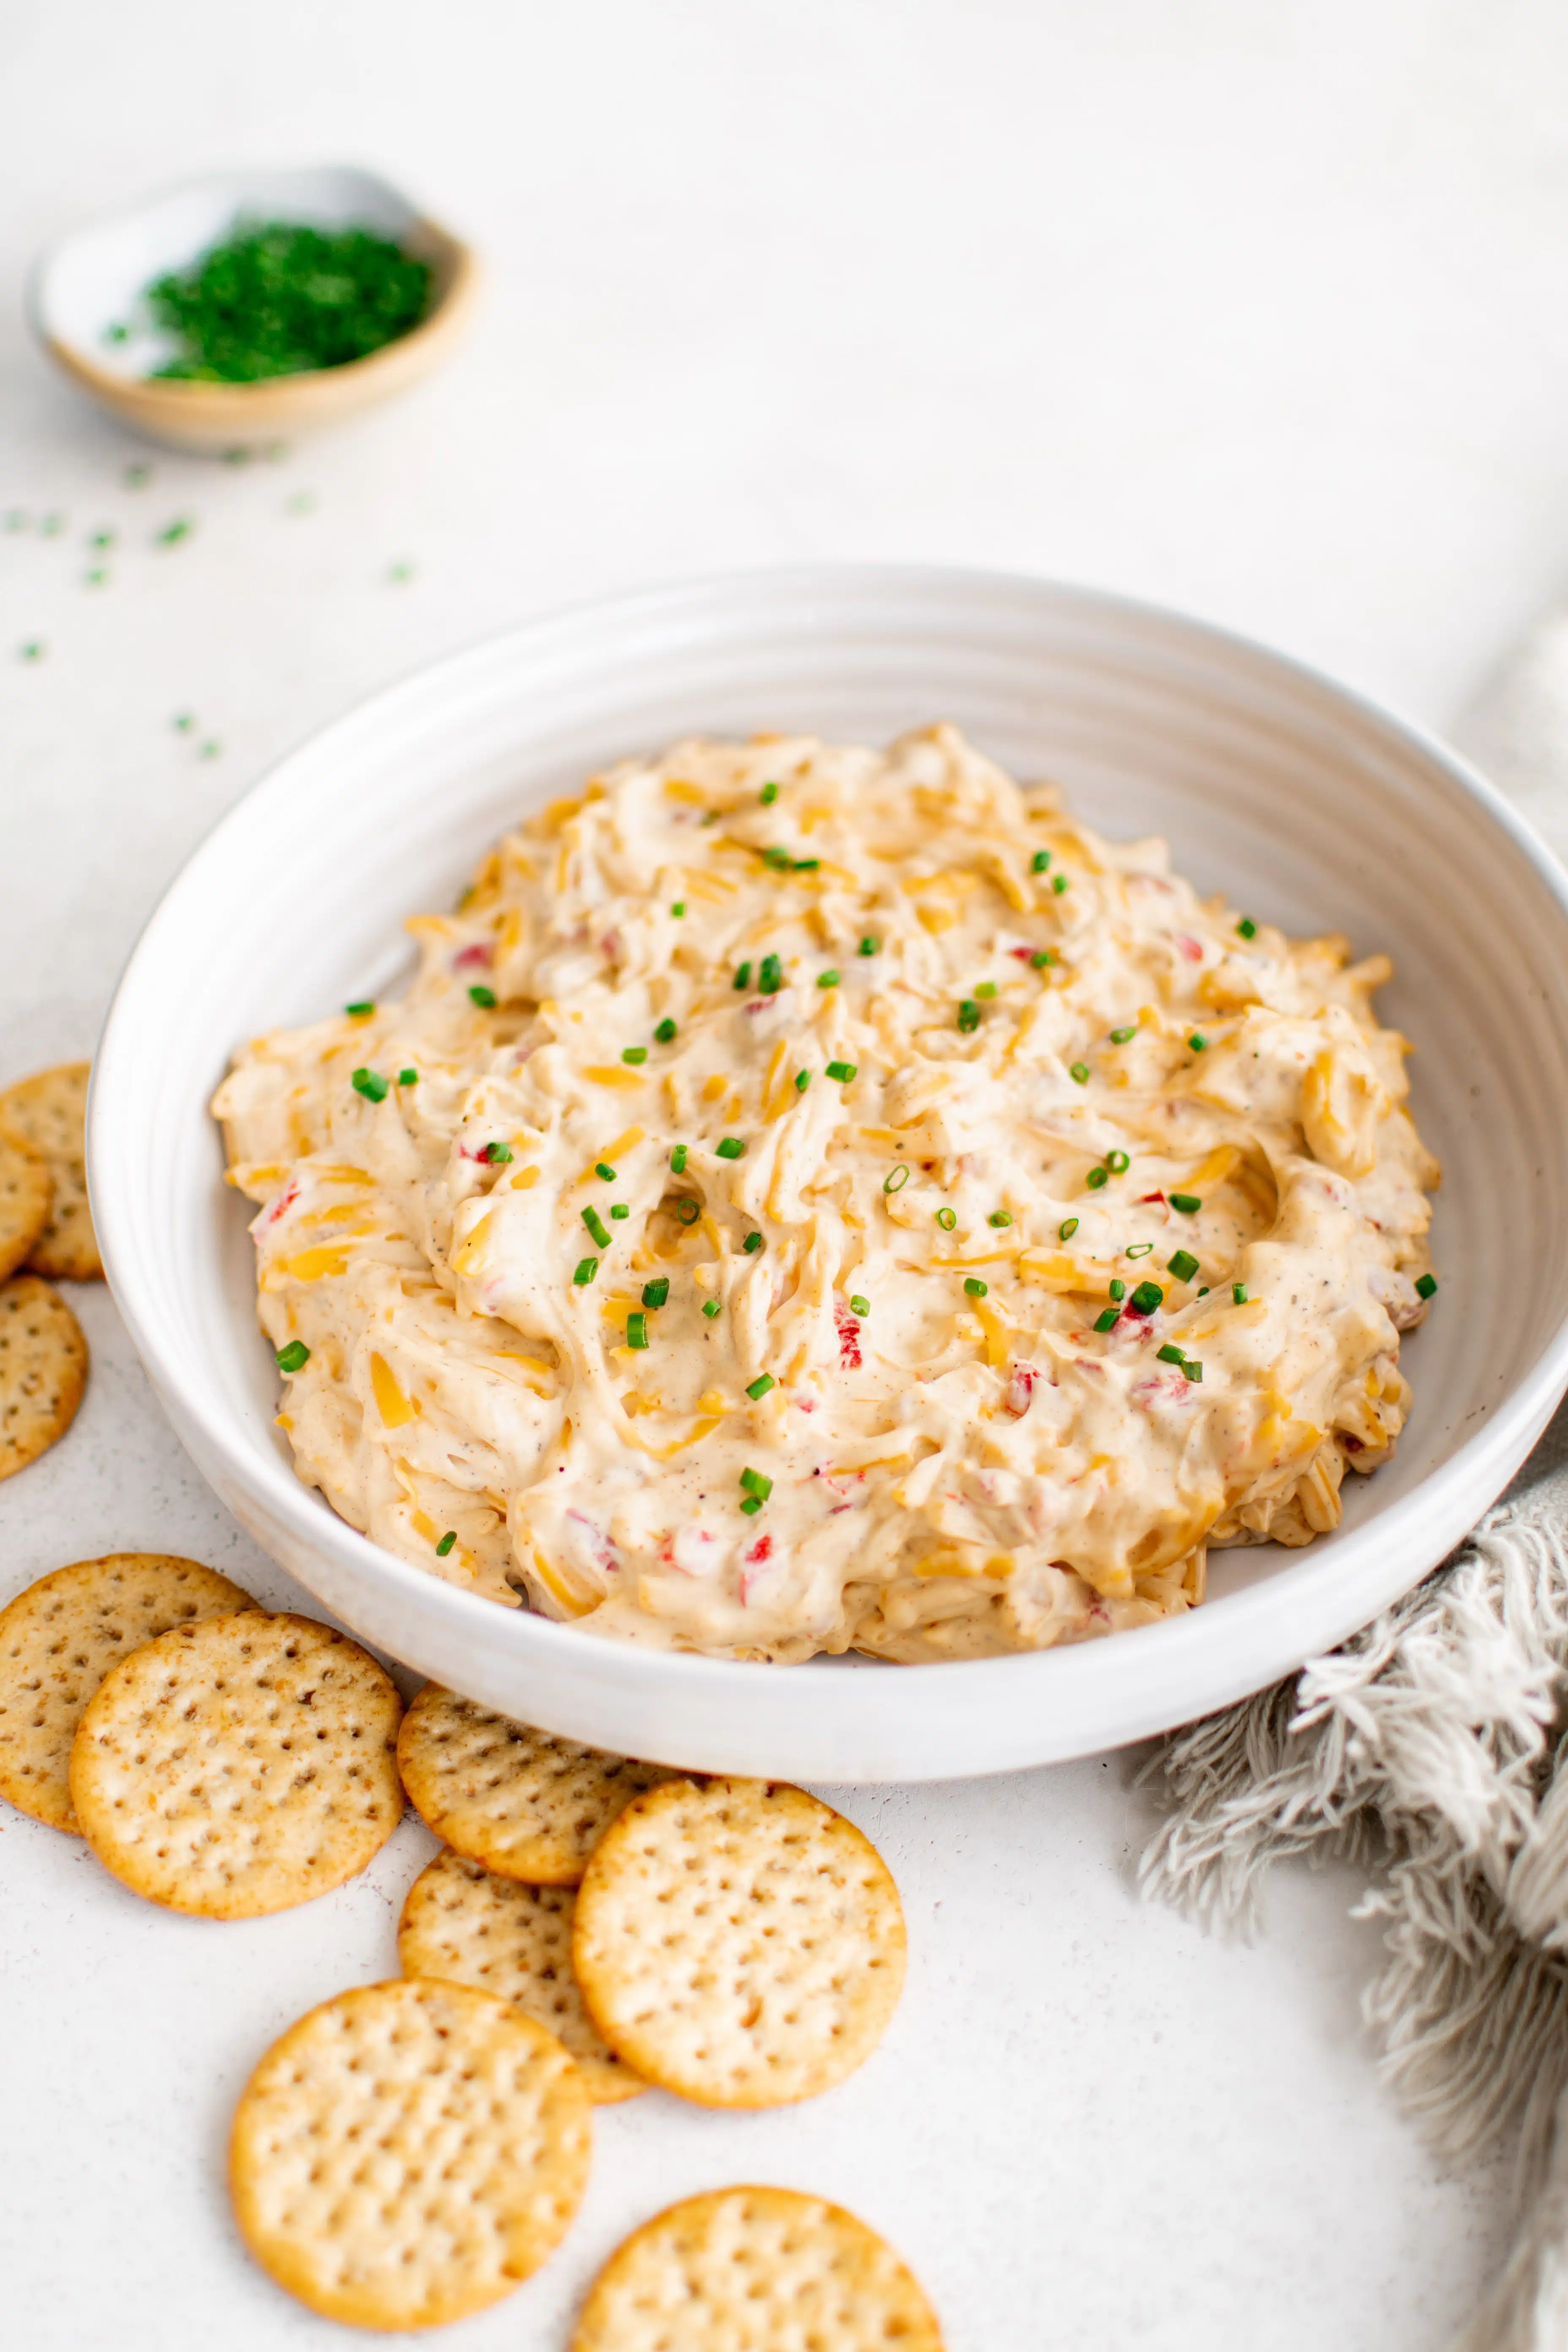 Large shallow mixing bowl filled with pimento cheese dip made with cream cheese, mayonnaise, cheddar cheese, and diced pimentos and garnished with freshly chopped chives and served with crackers on the side.